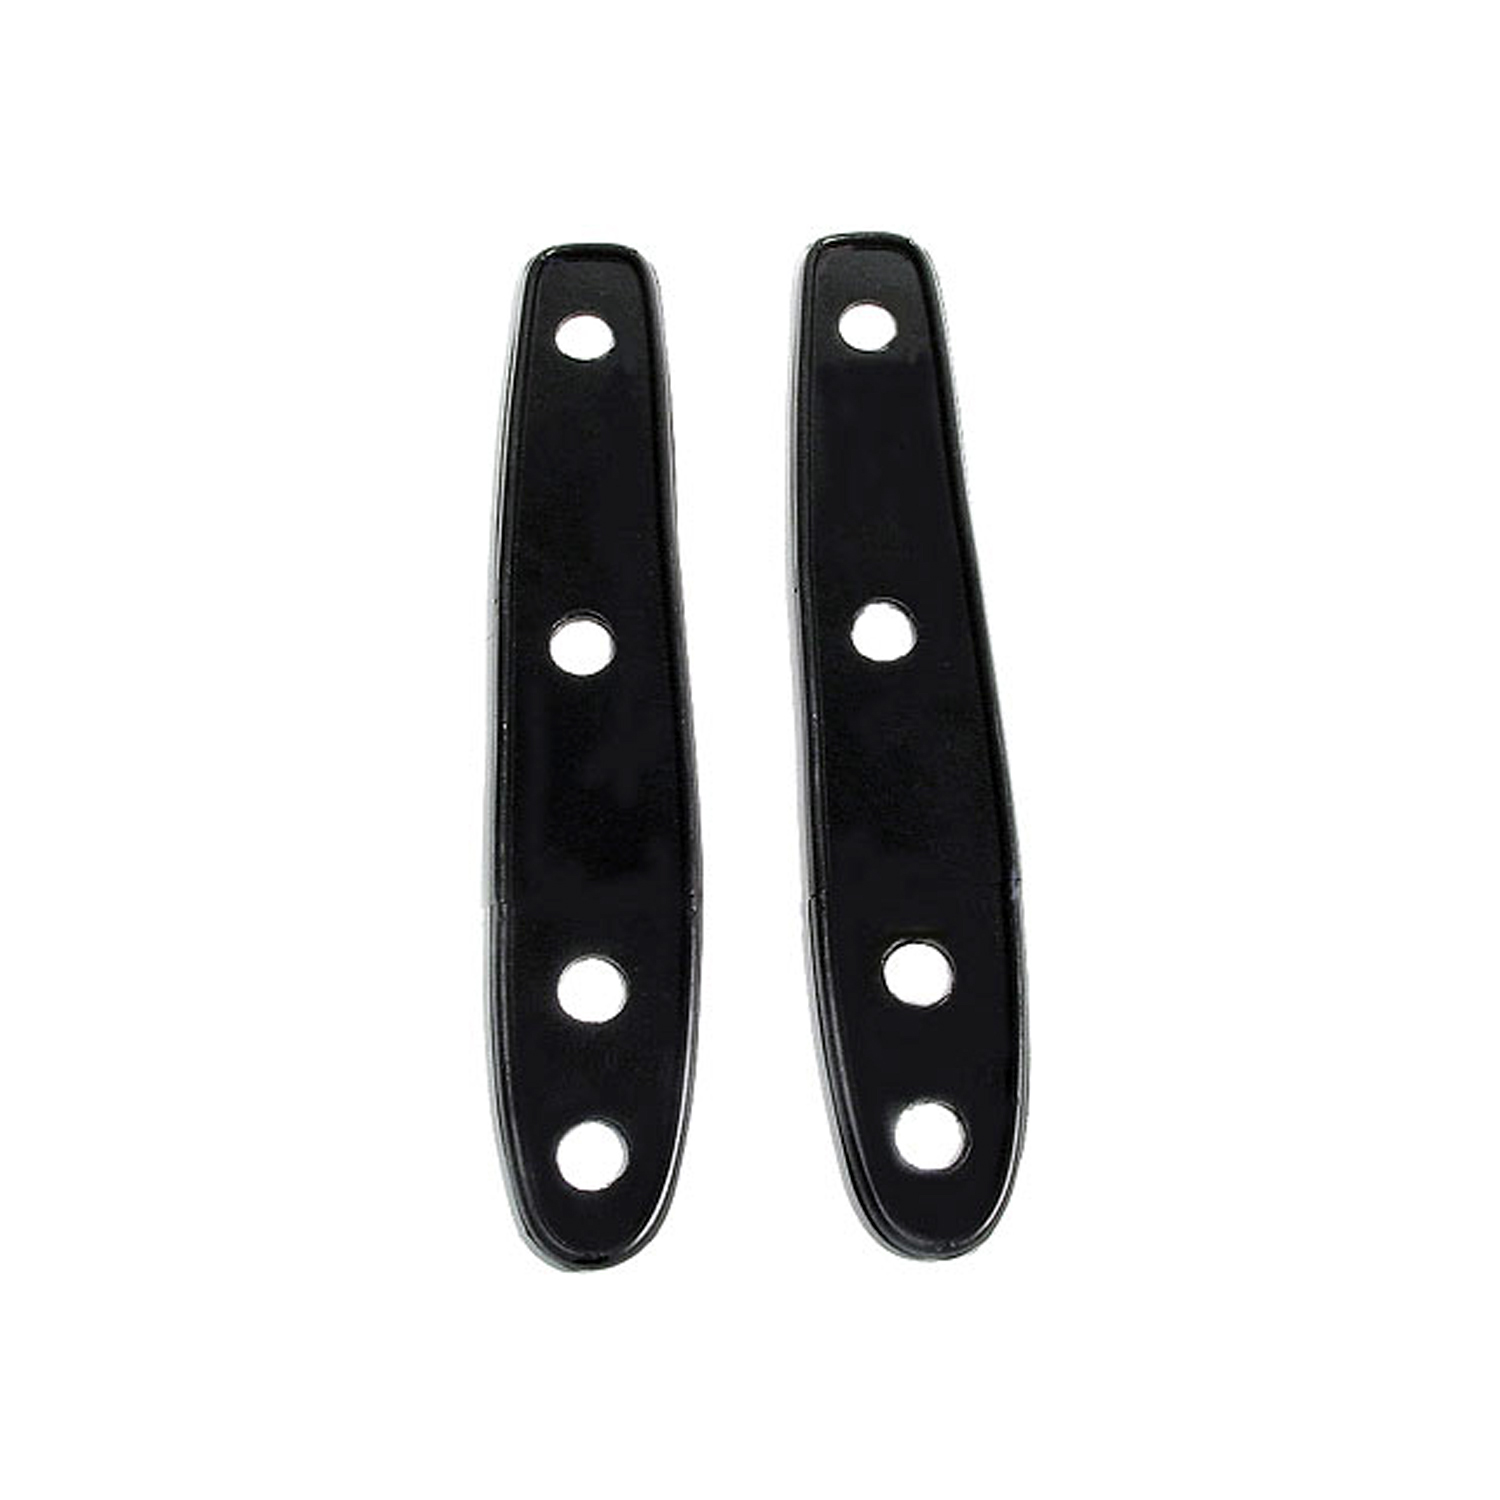 1940 Cadillac Series 60 Special Trunk Hinge Pads.  1-1/2 wide X 8-1/4 long.  Set-MP 444